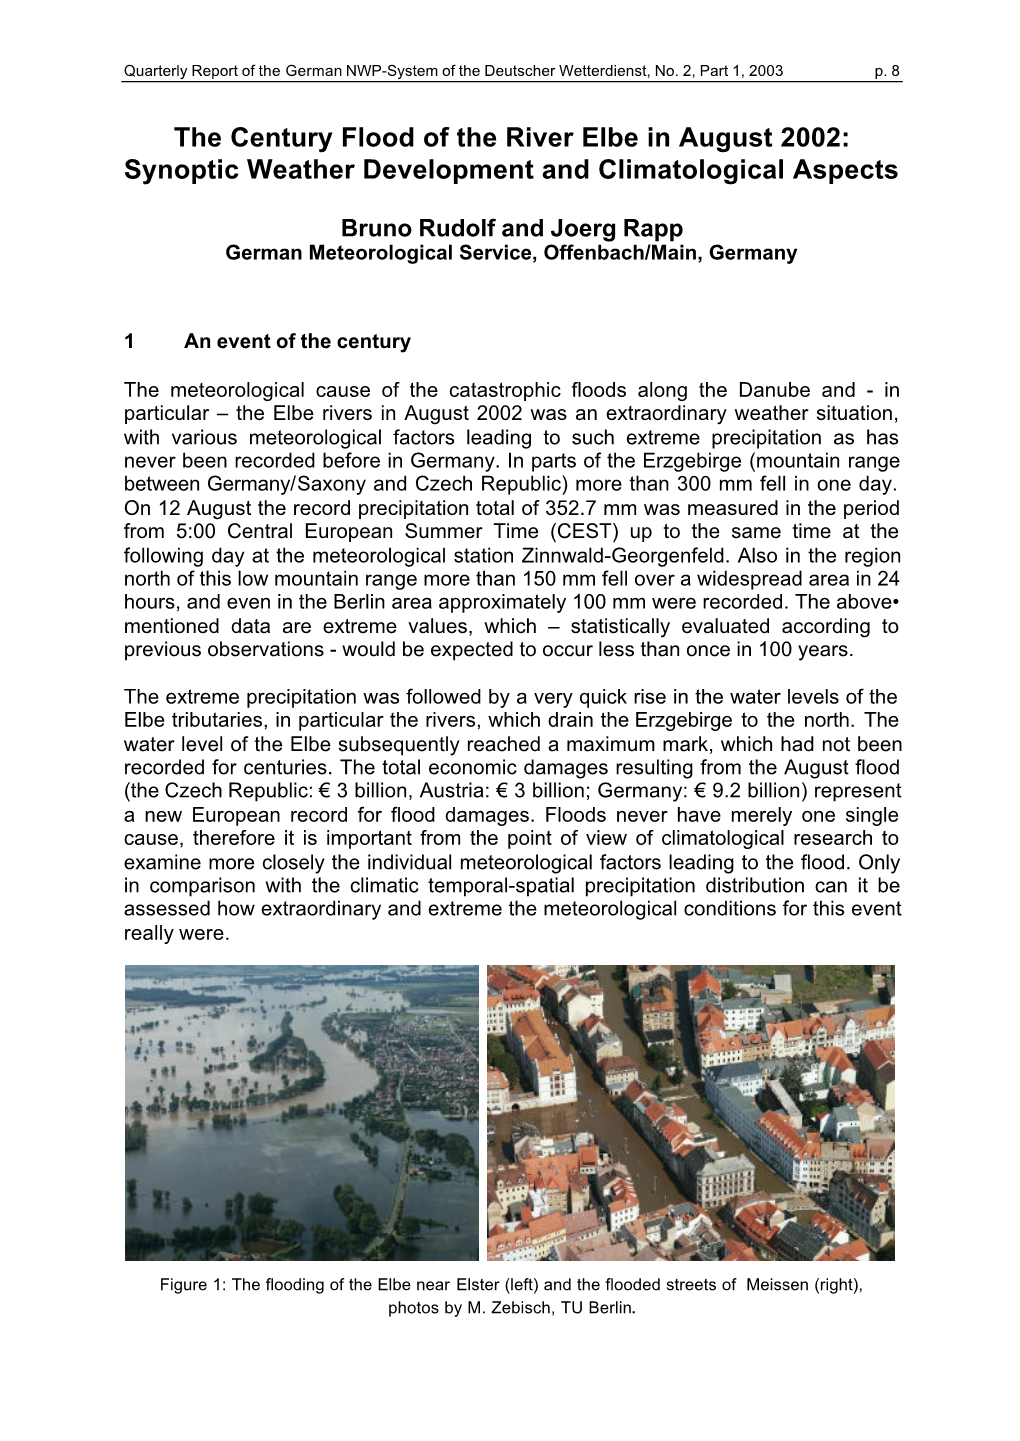 The Century Flood of the River Elbe in August 2002: Synoptic Weather Development and Climatological Aspects